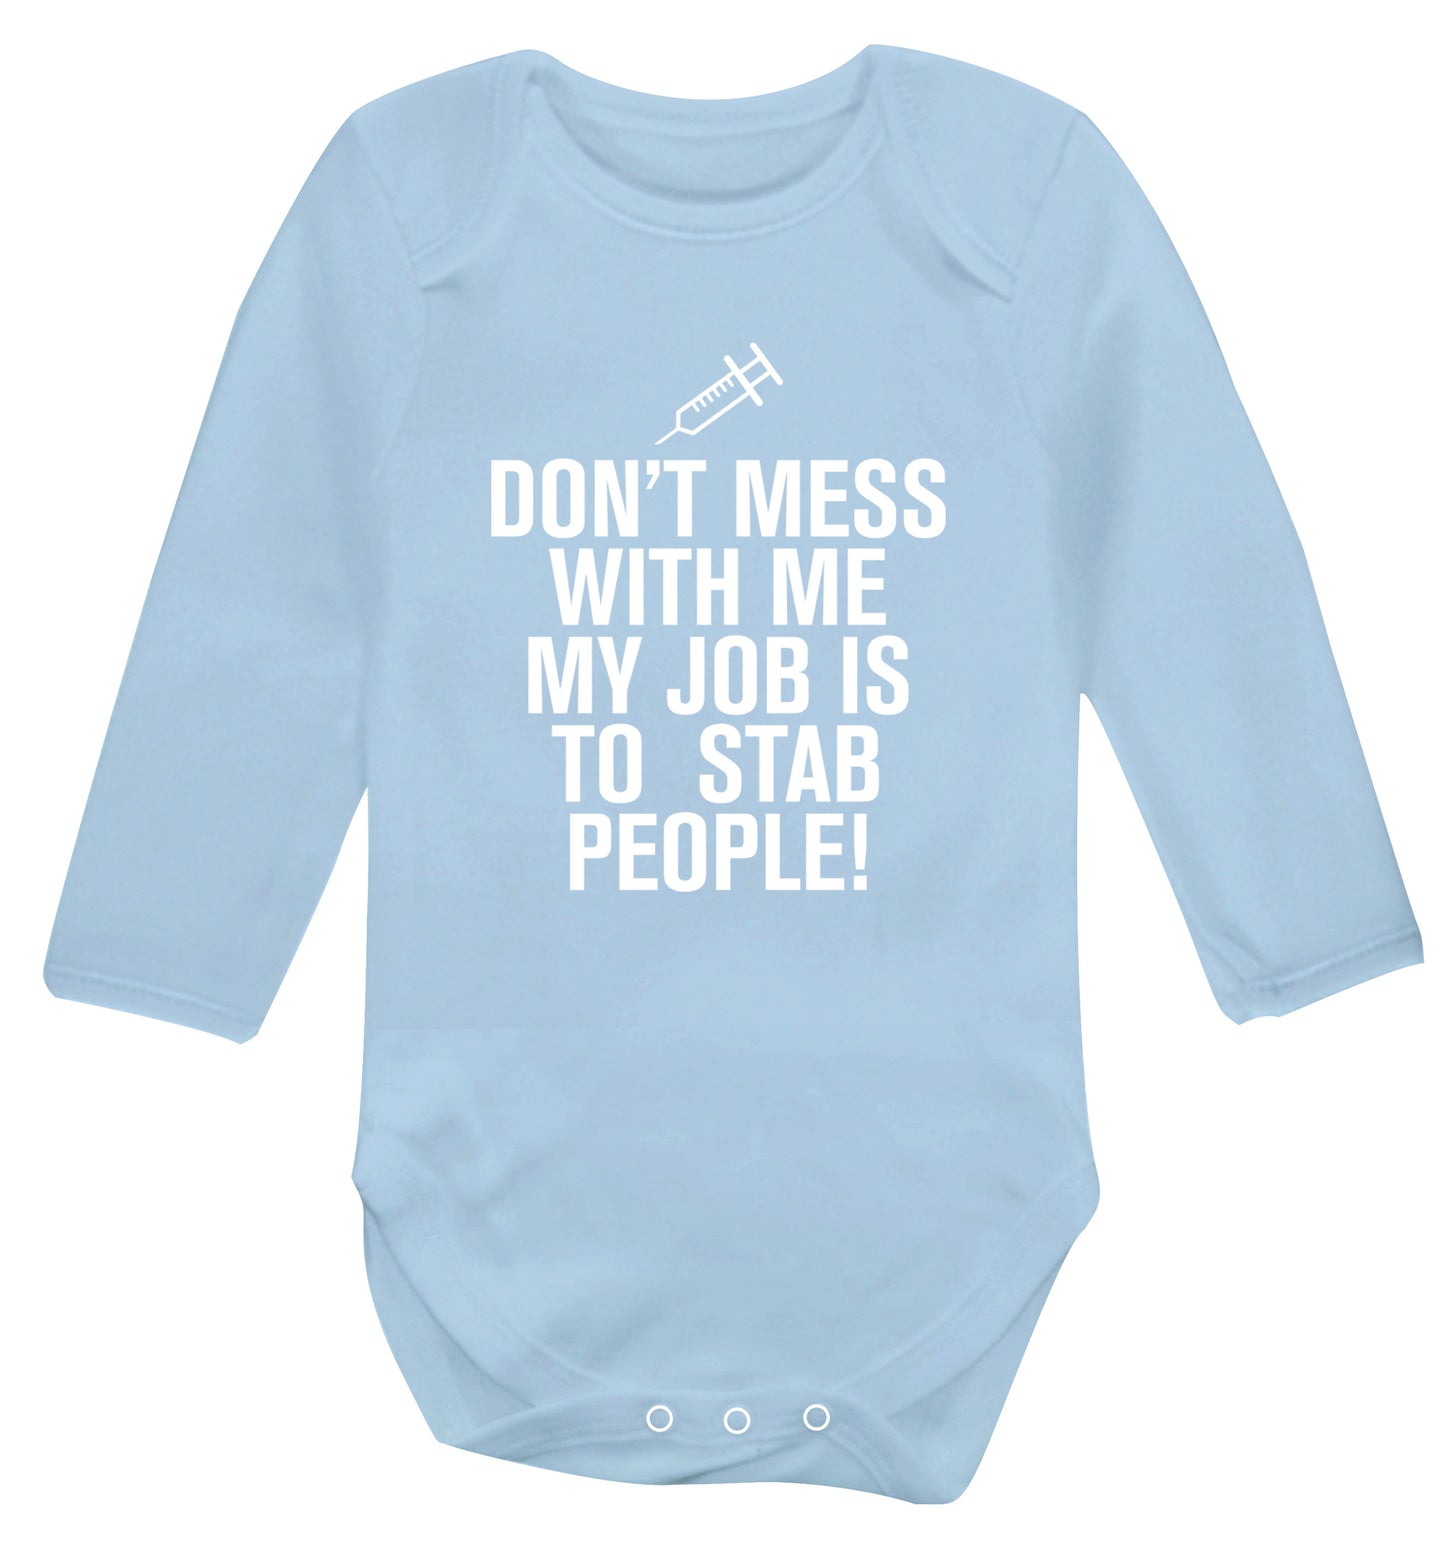 Don't mess with me my job is to stab people! Baby Vest long sleeved pale blue 6-12 months